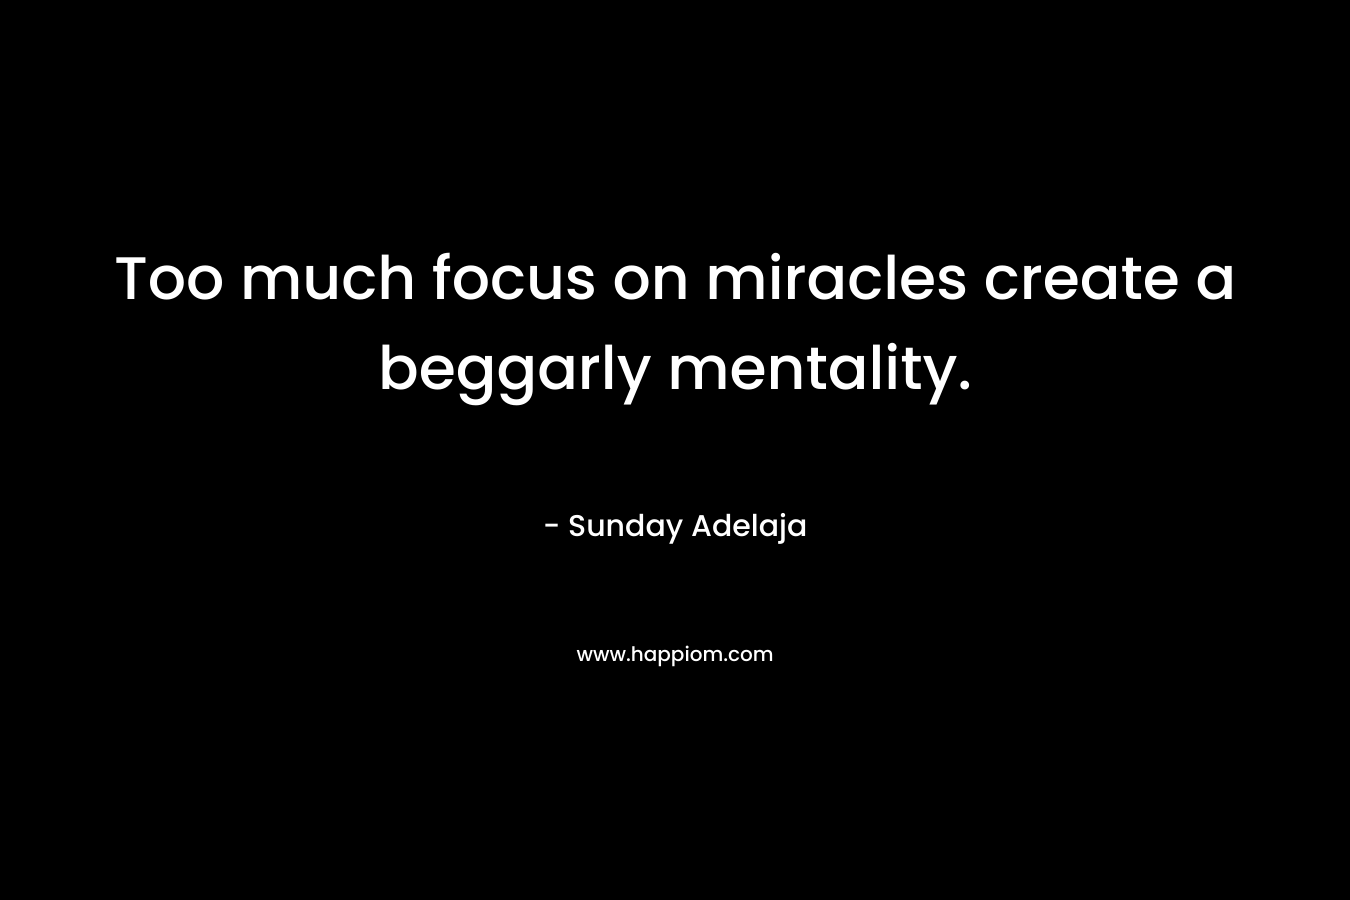 Too much focus on miracles create a beggarly mentality.